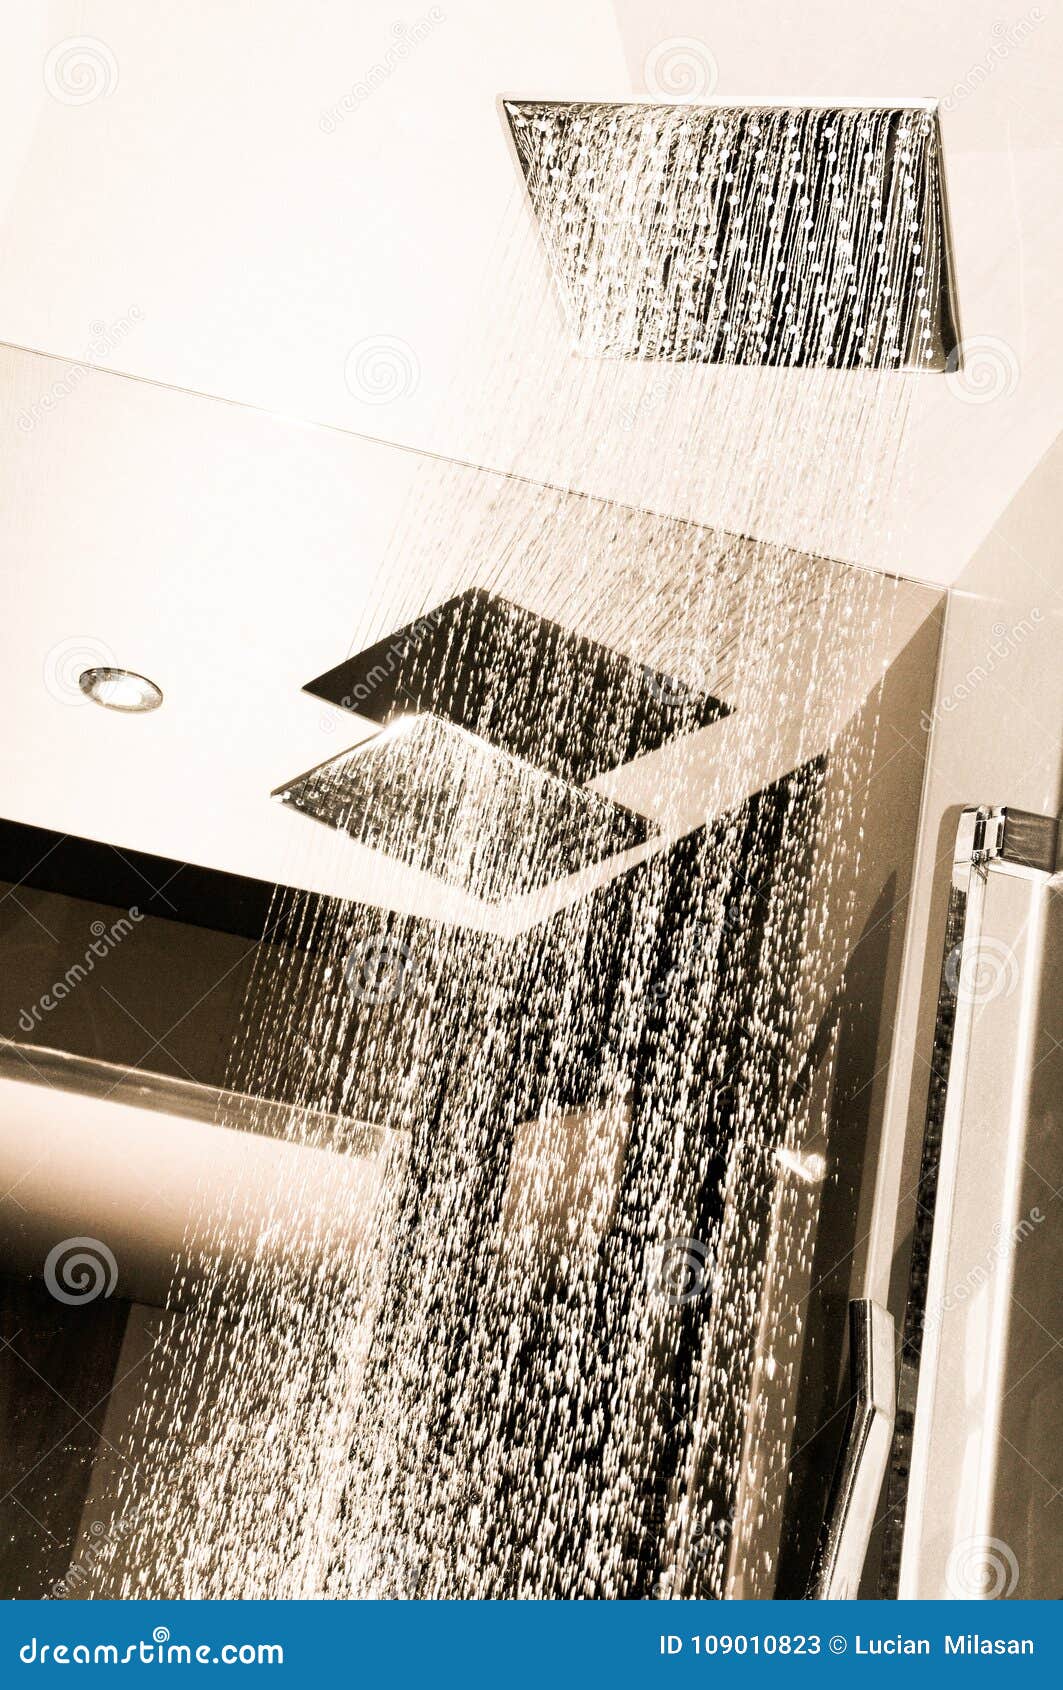 Modern Bathroom Interior With Ceiling Shower Stock Image